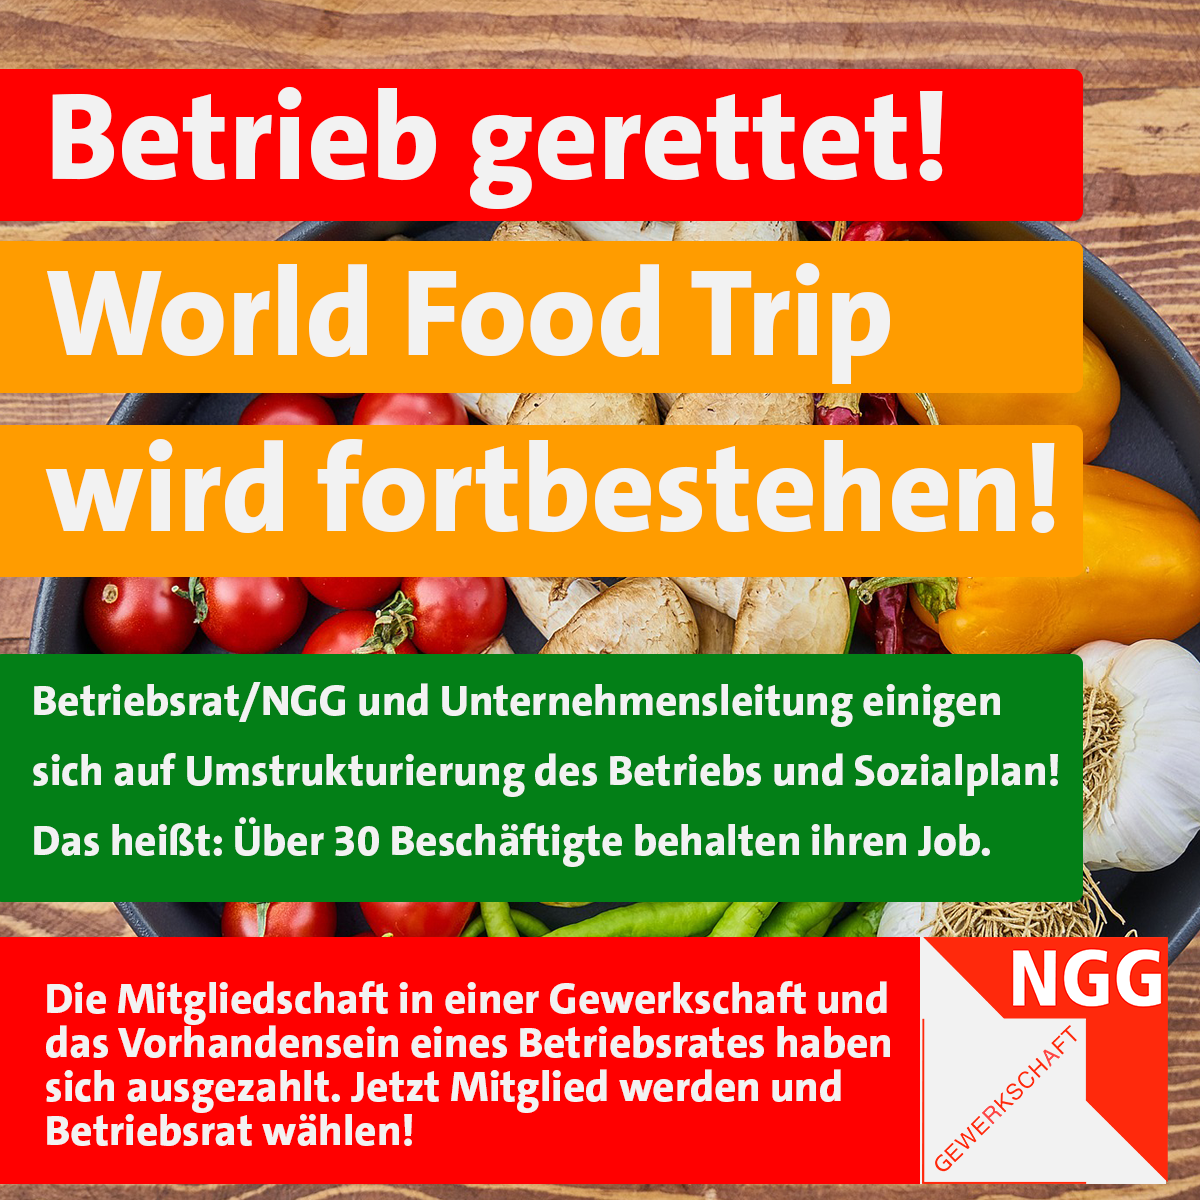 world food trip insolvent